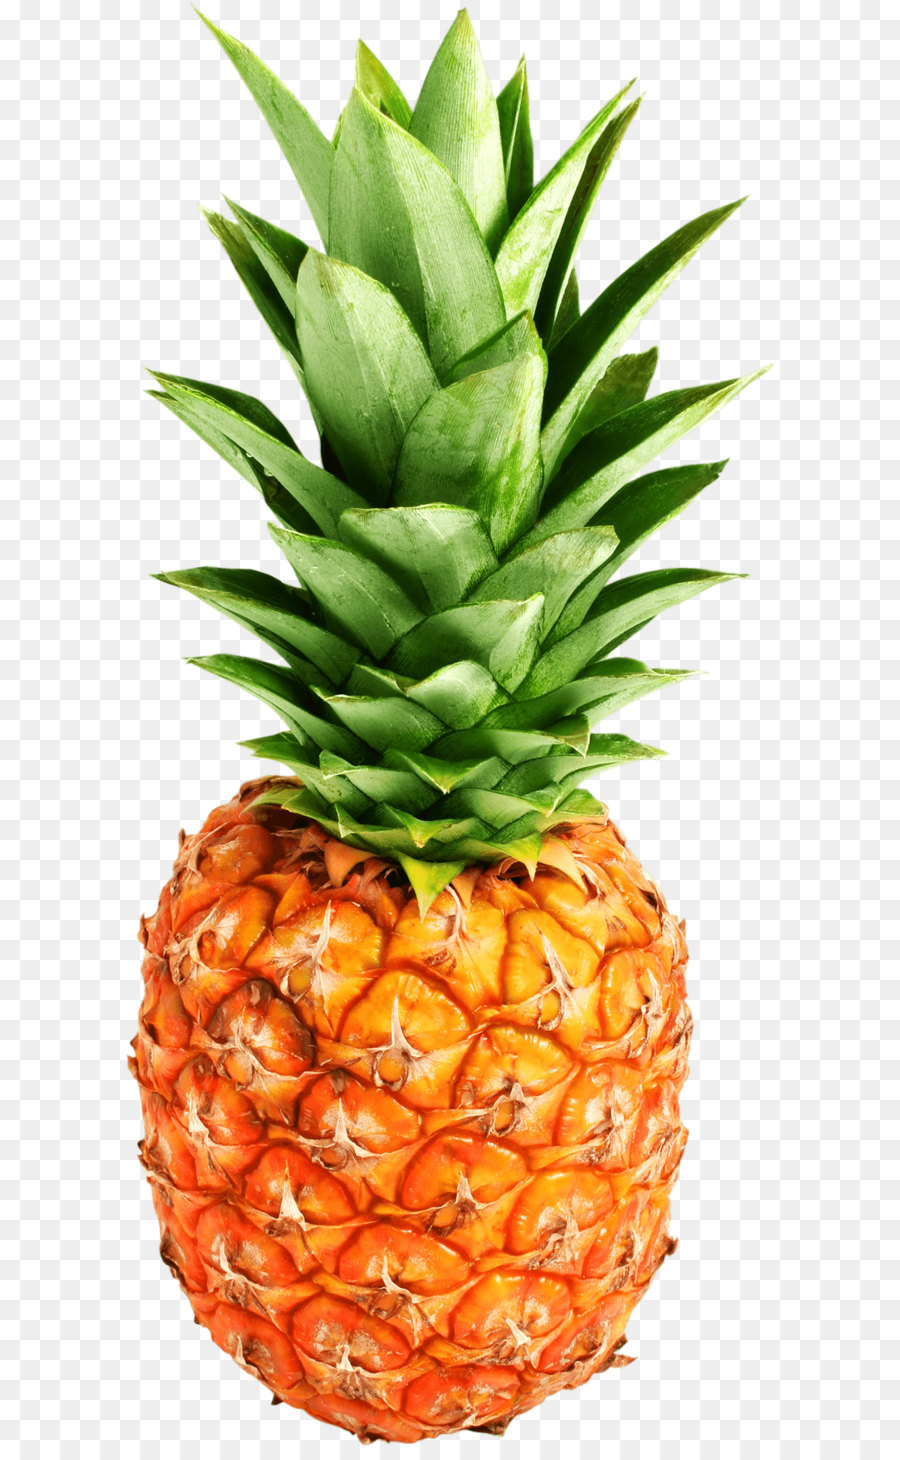 Juice iPhone 7 Pineapple - Pineapple Png Image Download png download - 1280*2851 - Free Transparent Juice png Download.